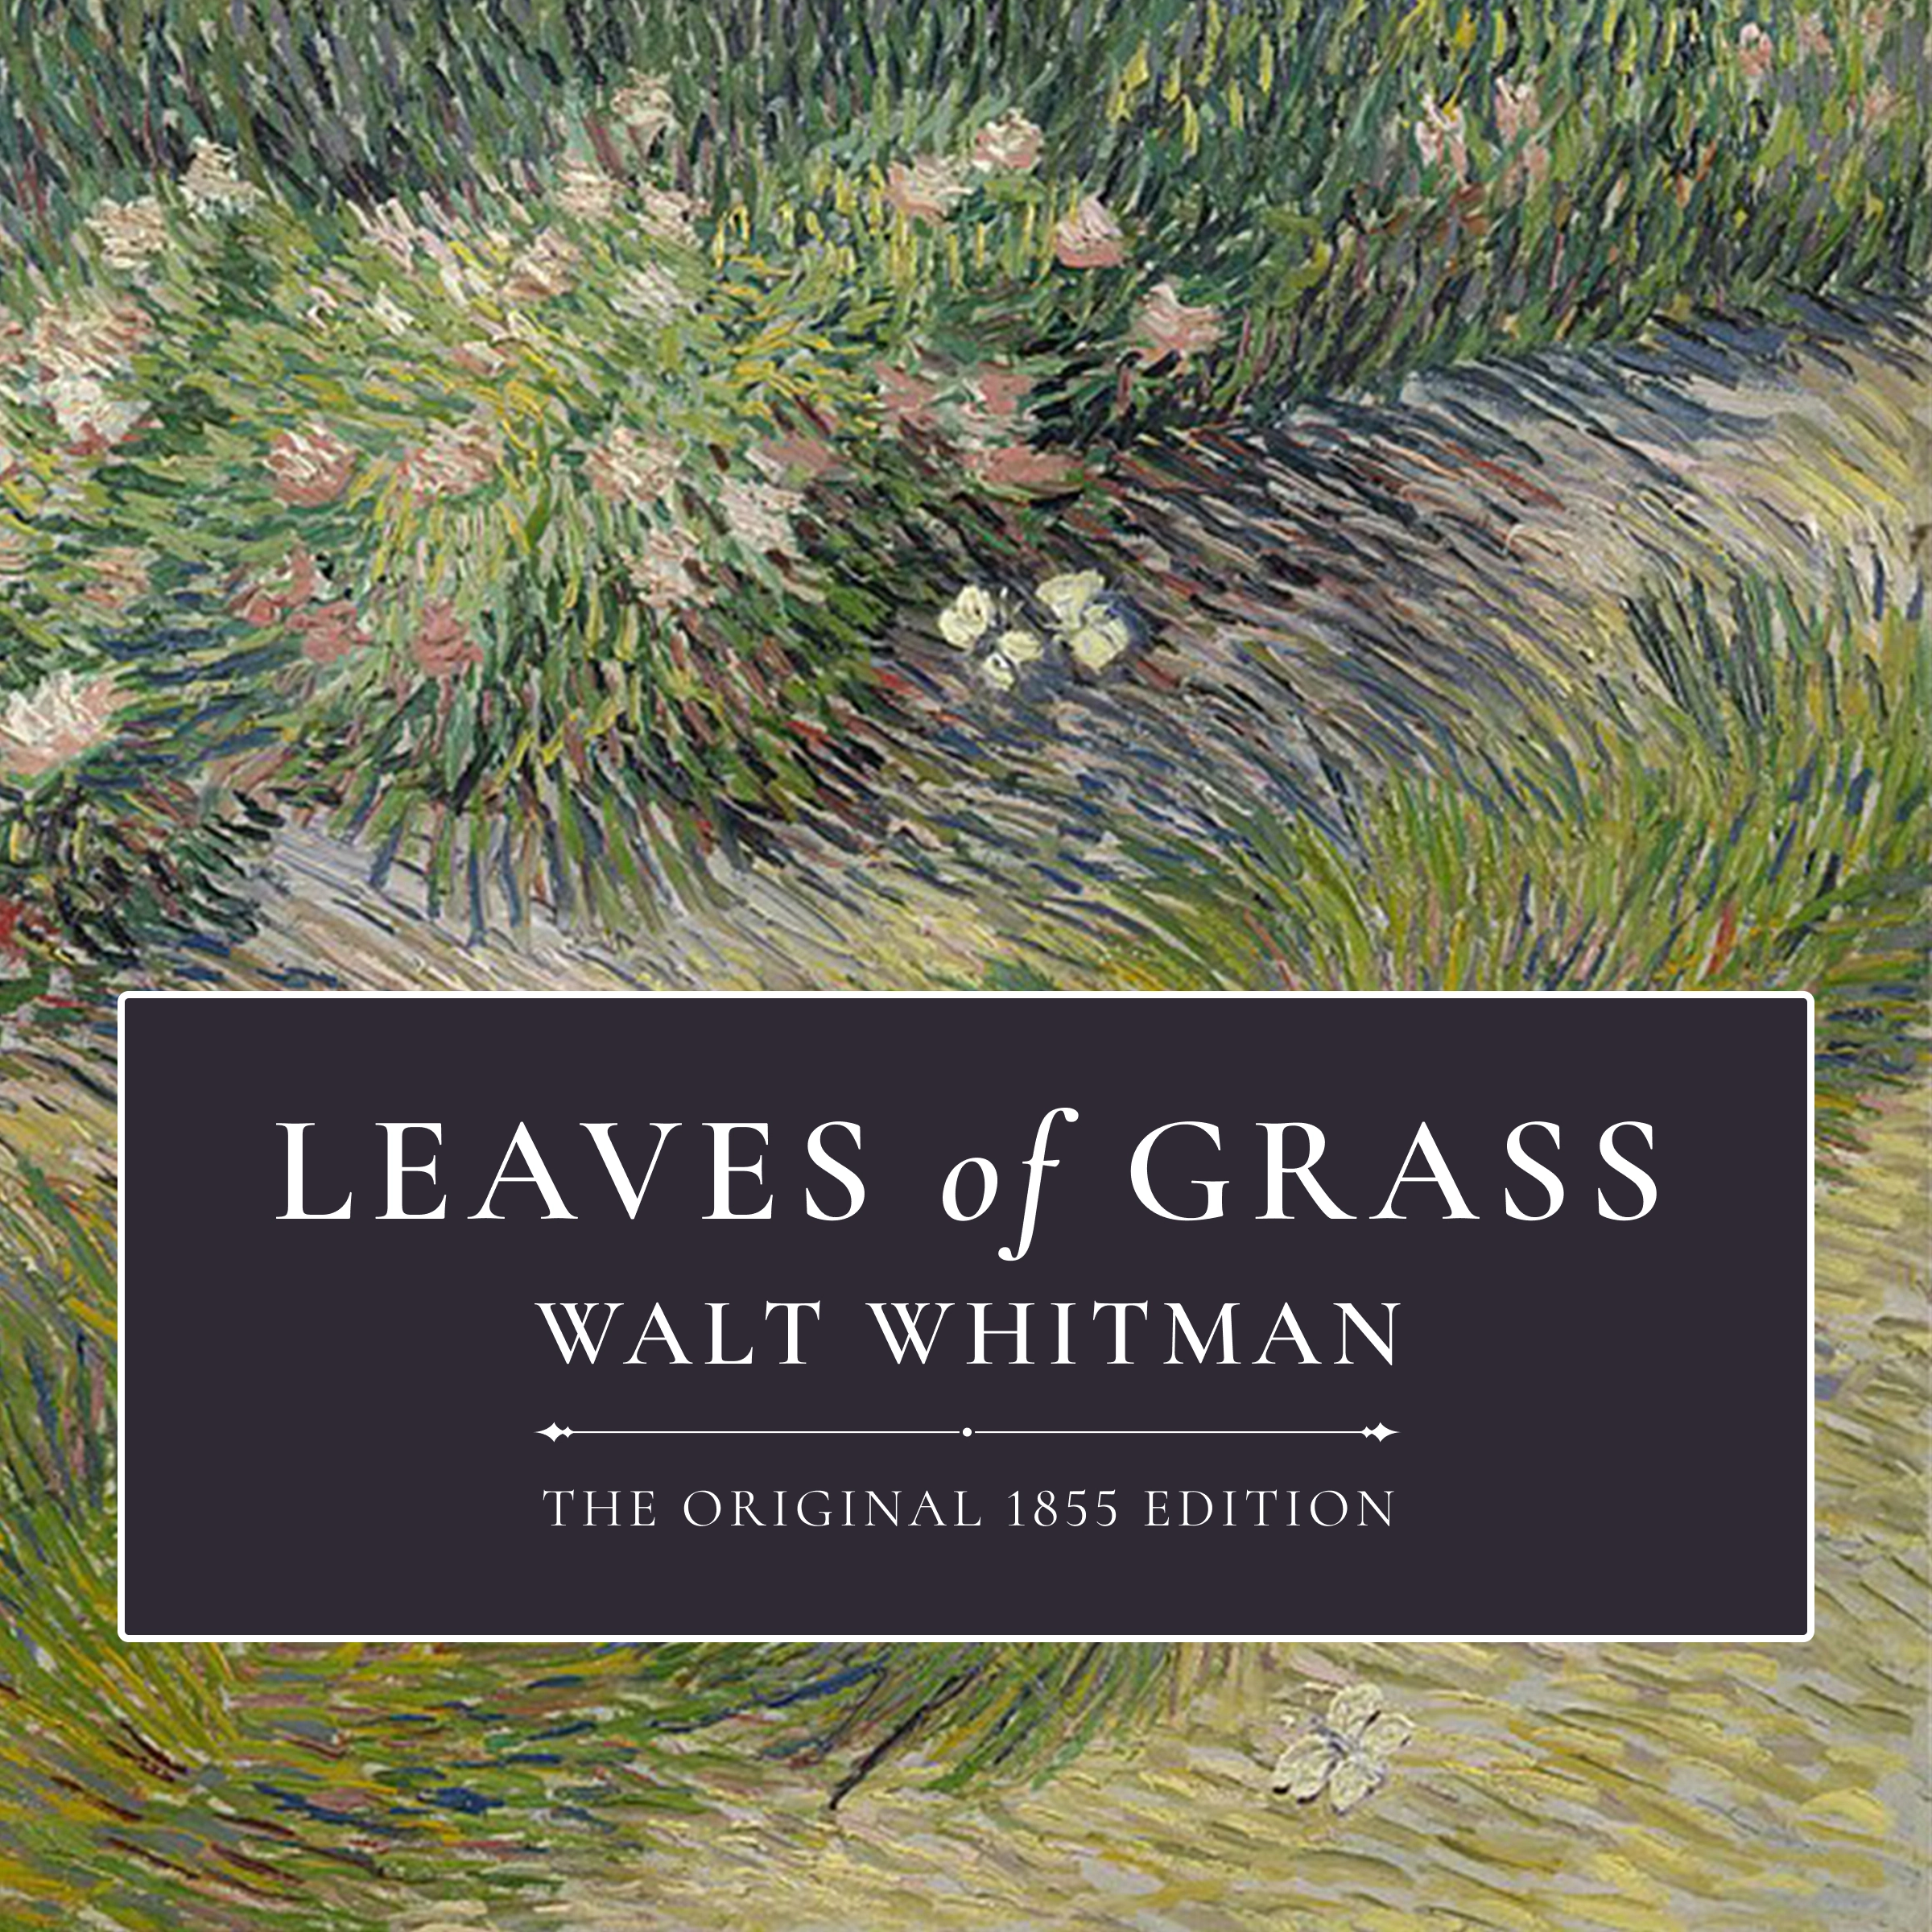 Leaves of Grass, The Original 1855 Edition Audiobook by Walt Whitman